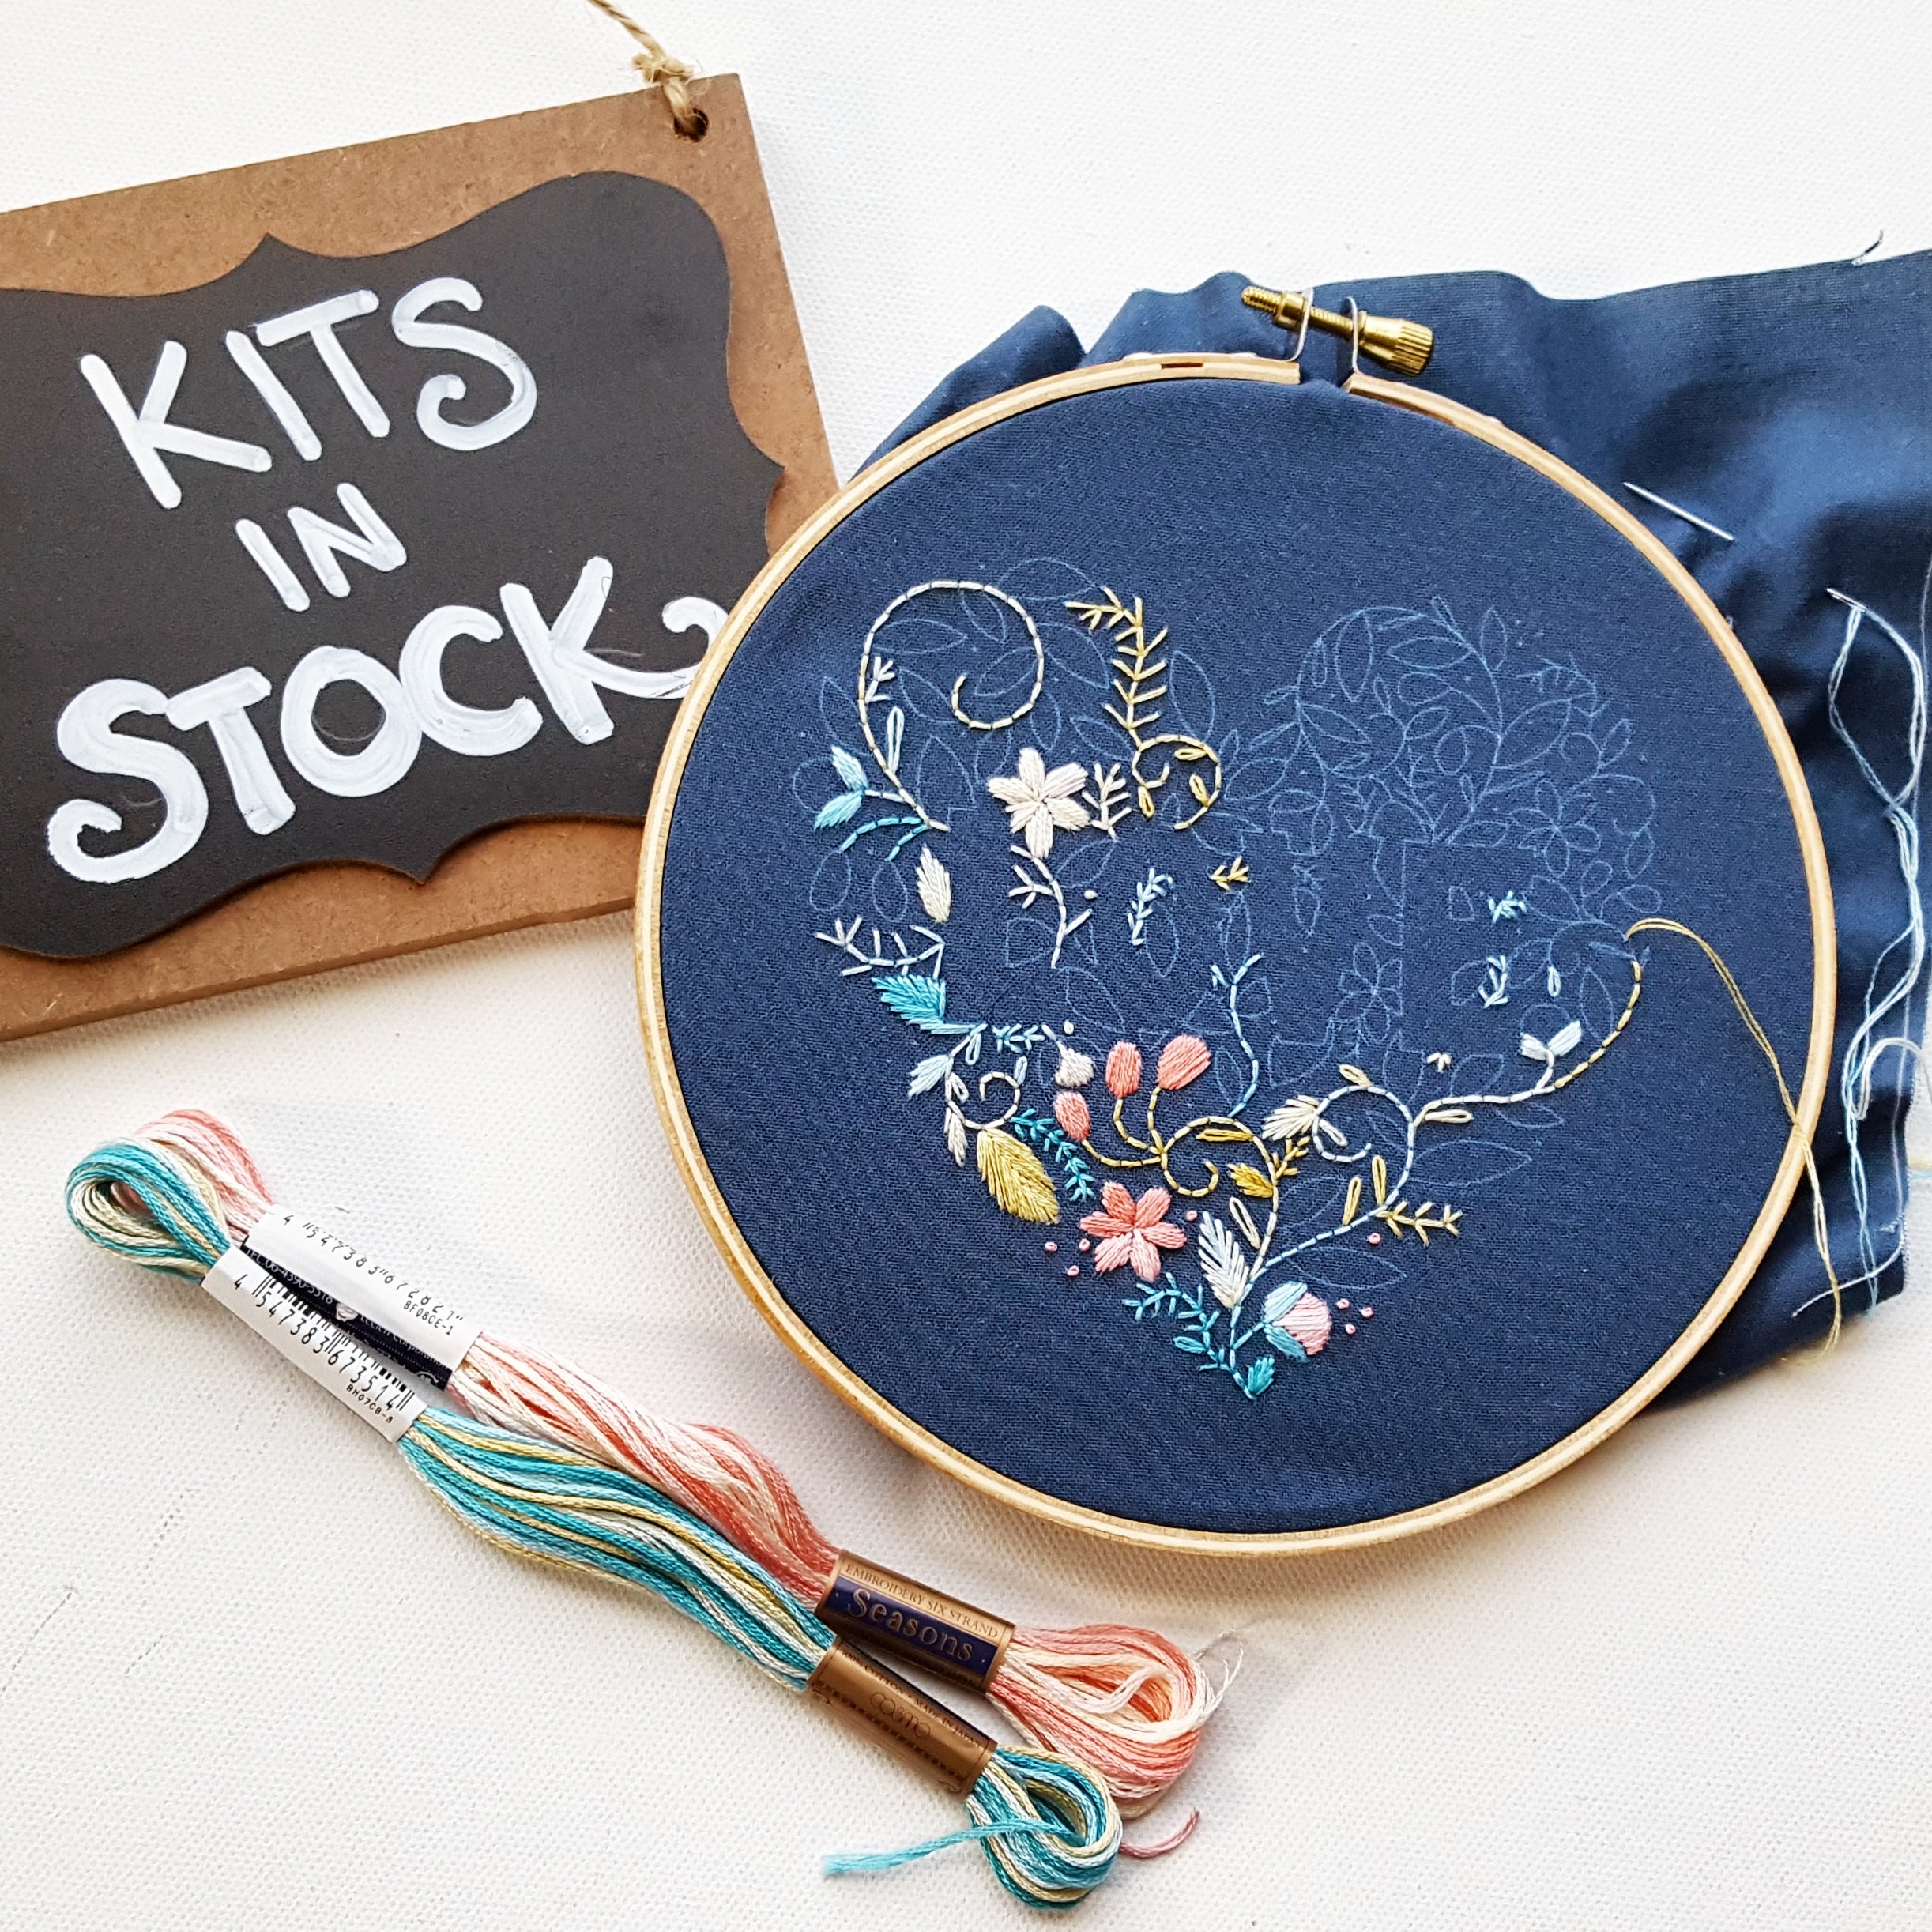 LOVE Embroidery Kit – Jessica Long Embroidery